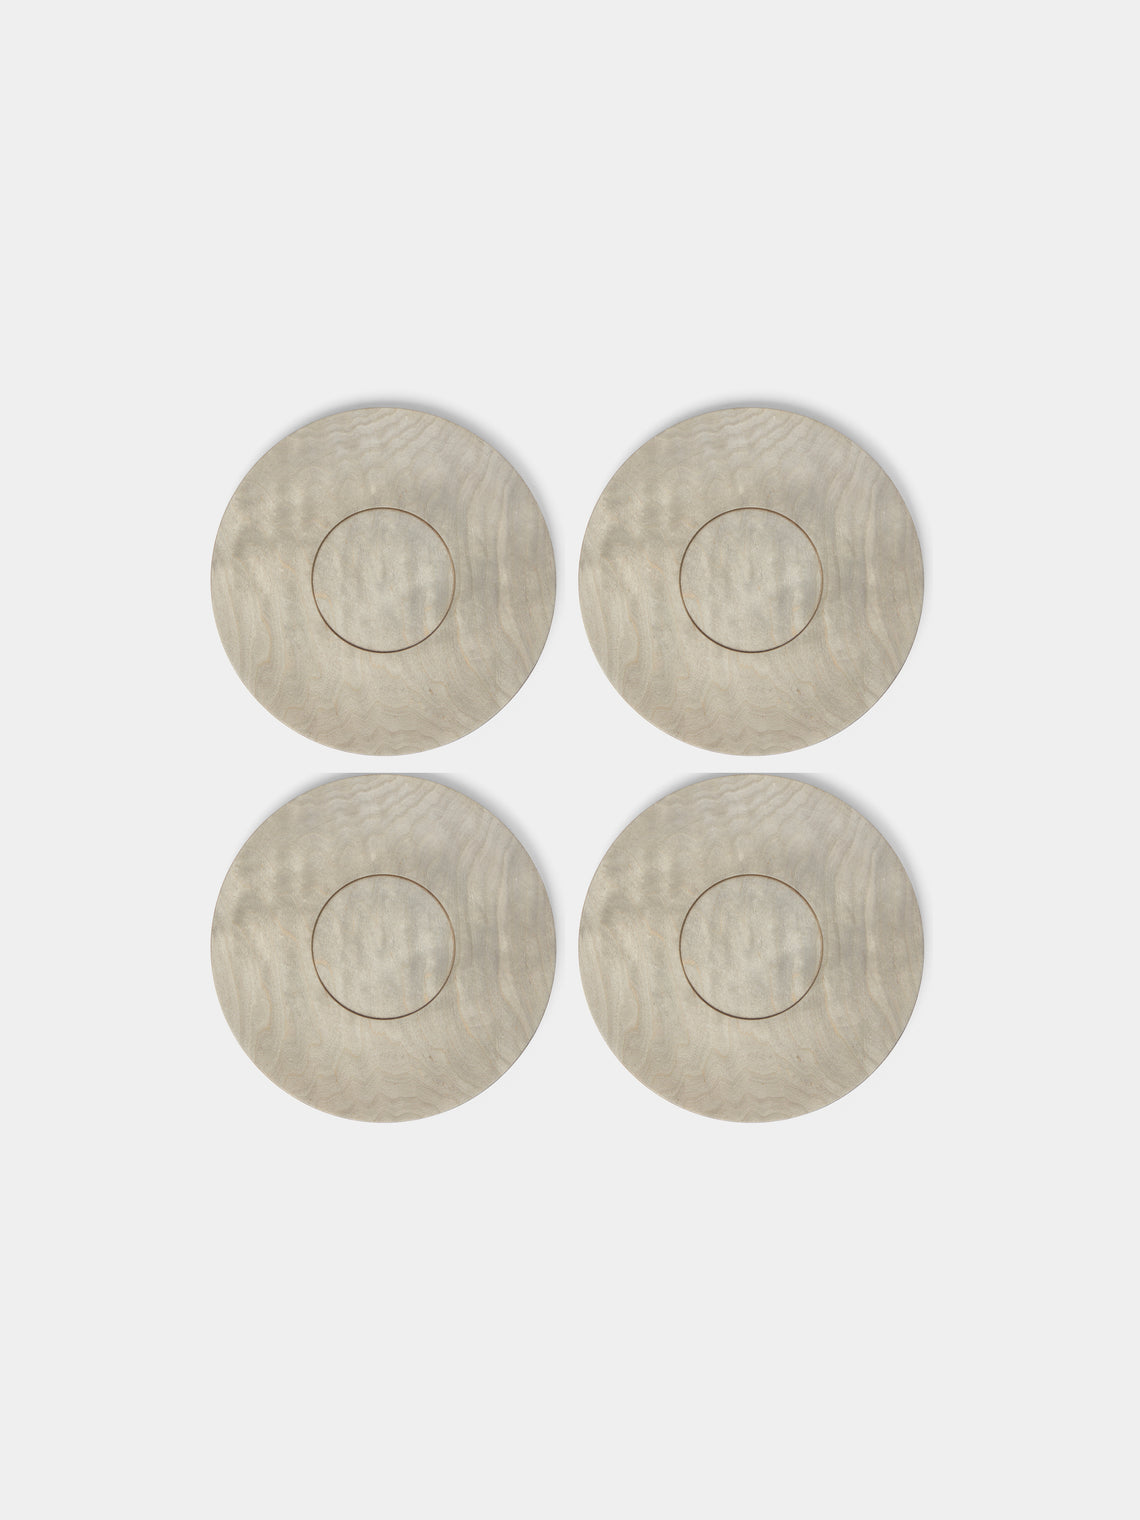 Ifuji - Delft Hand-Carved Wood Small Plates (Set of 4) -  - ABASK